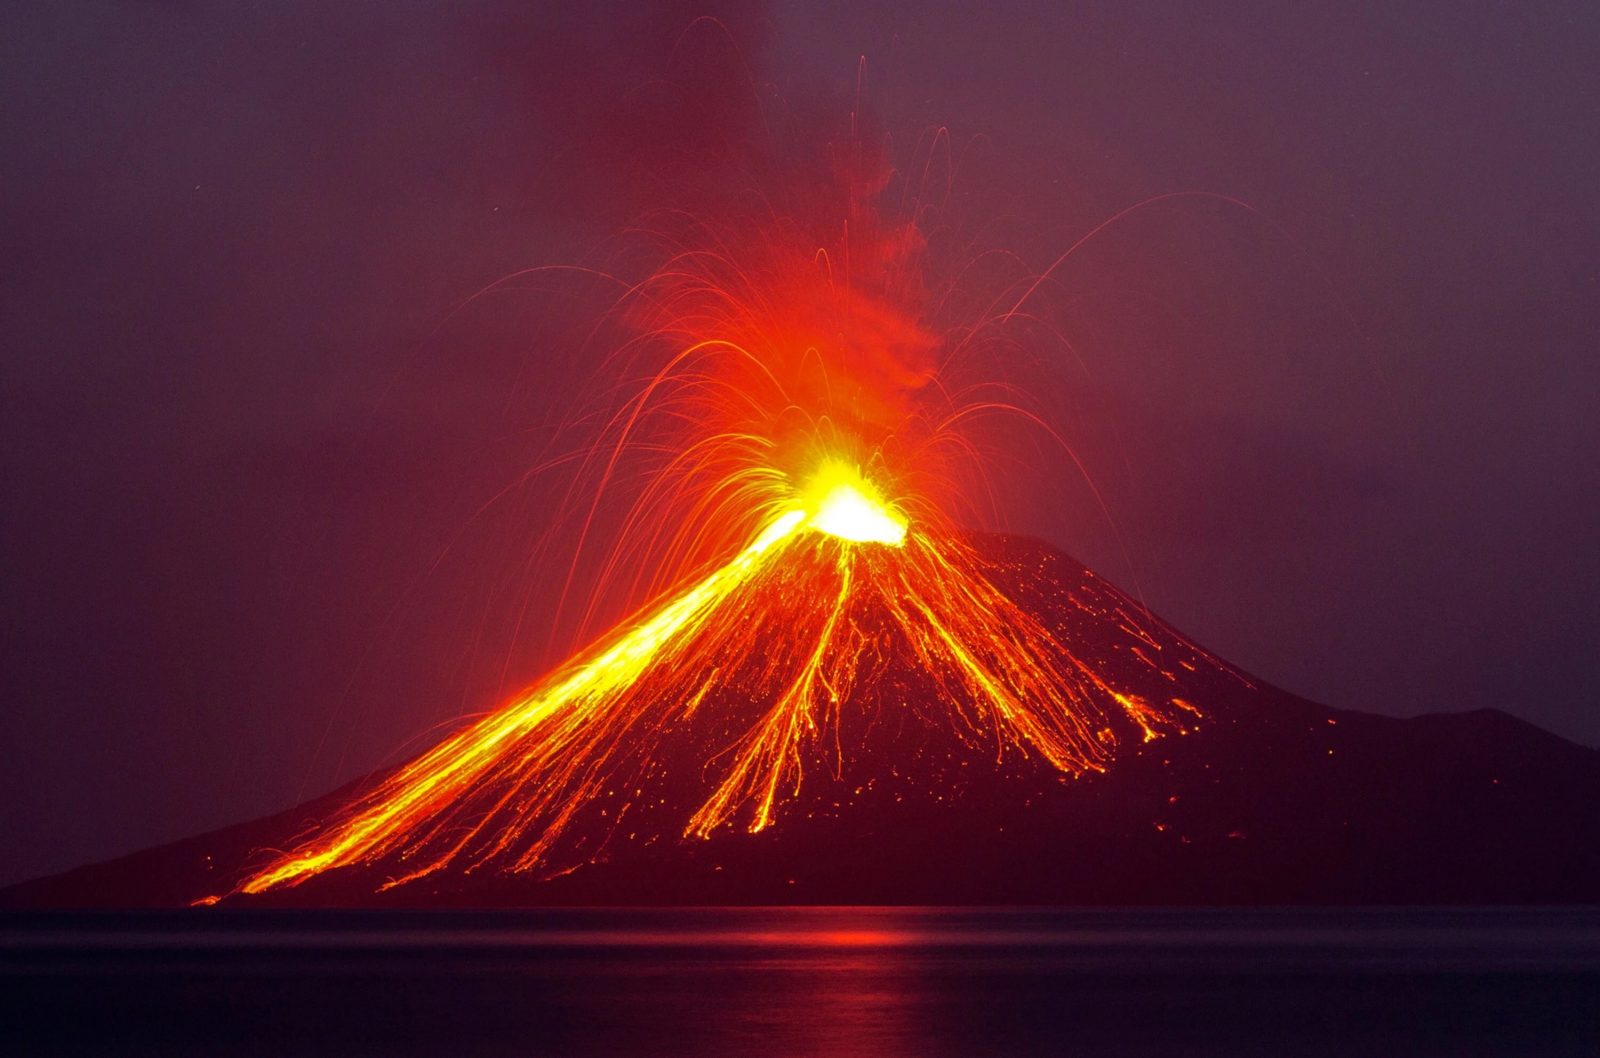 Passing This General Knowledge Quiz Is the Only Proof You Need to Show You’re the Smart Friend Volcano Eruption